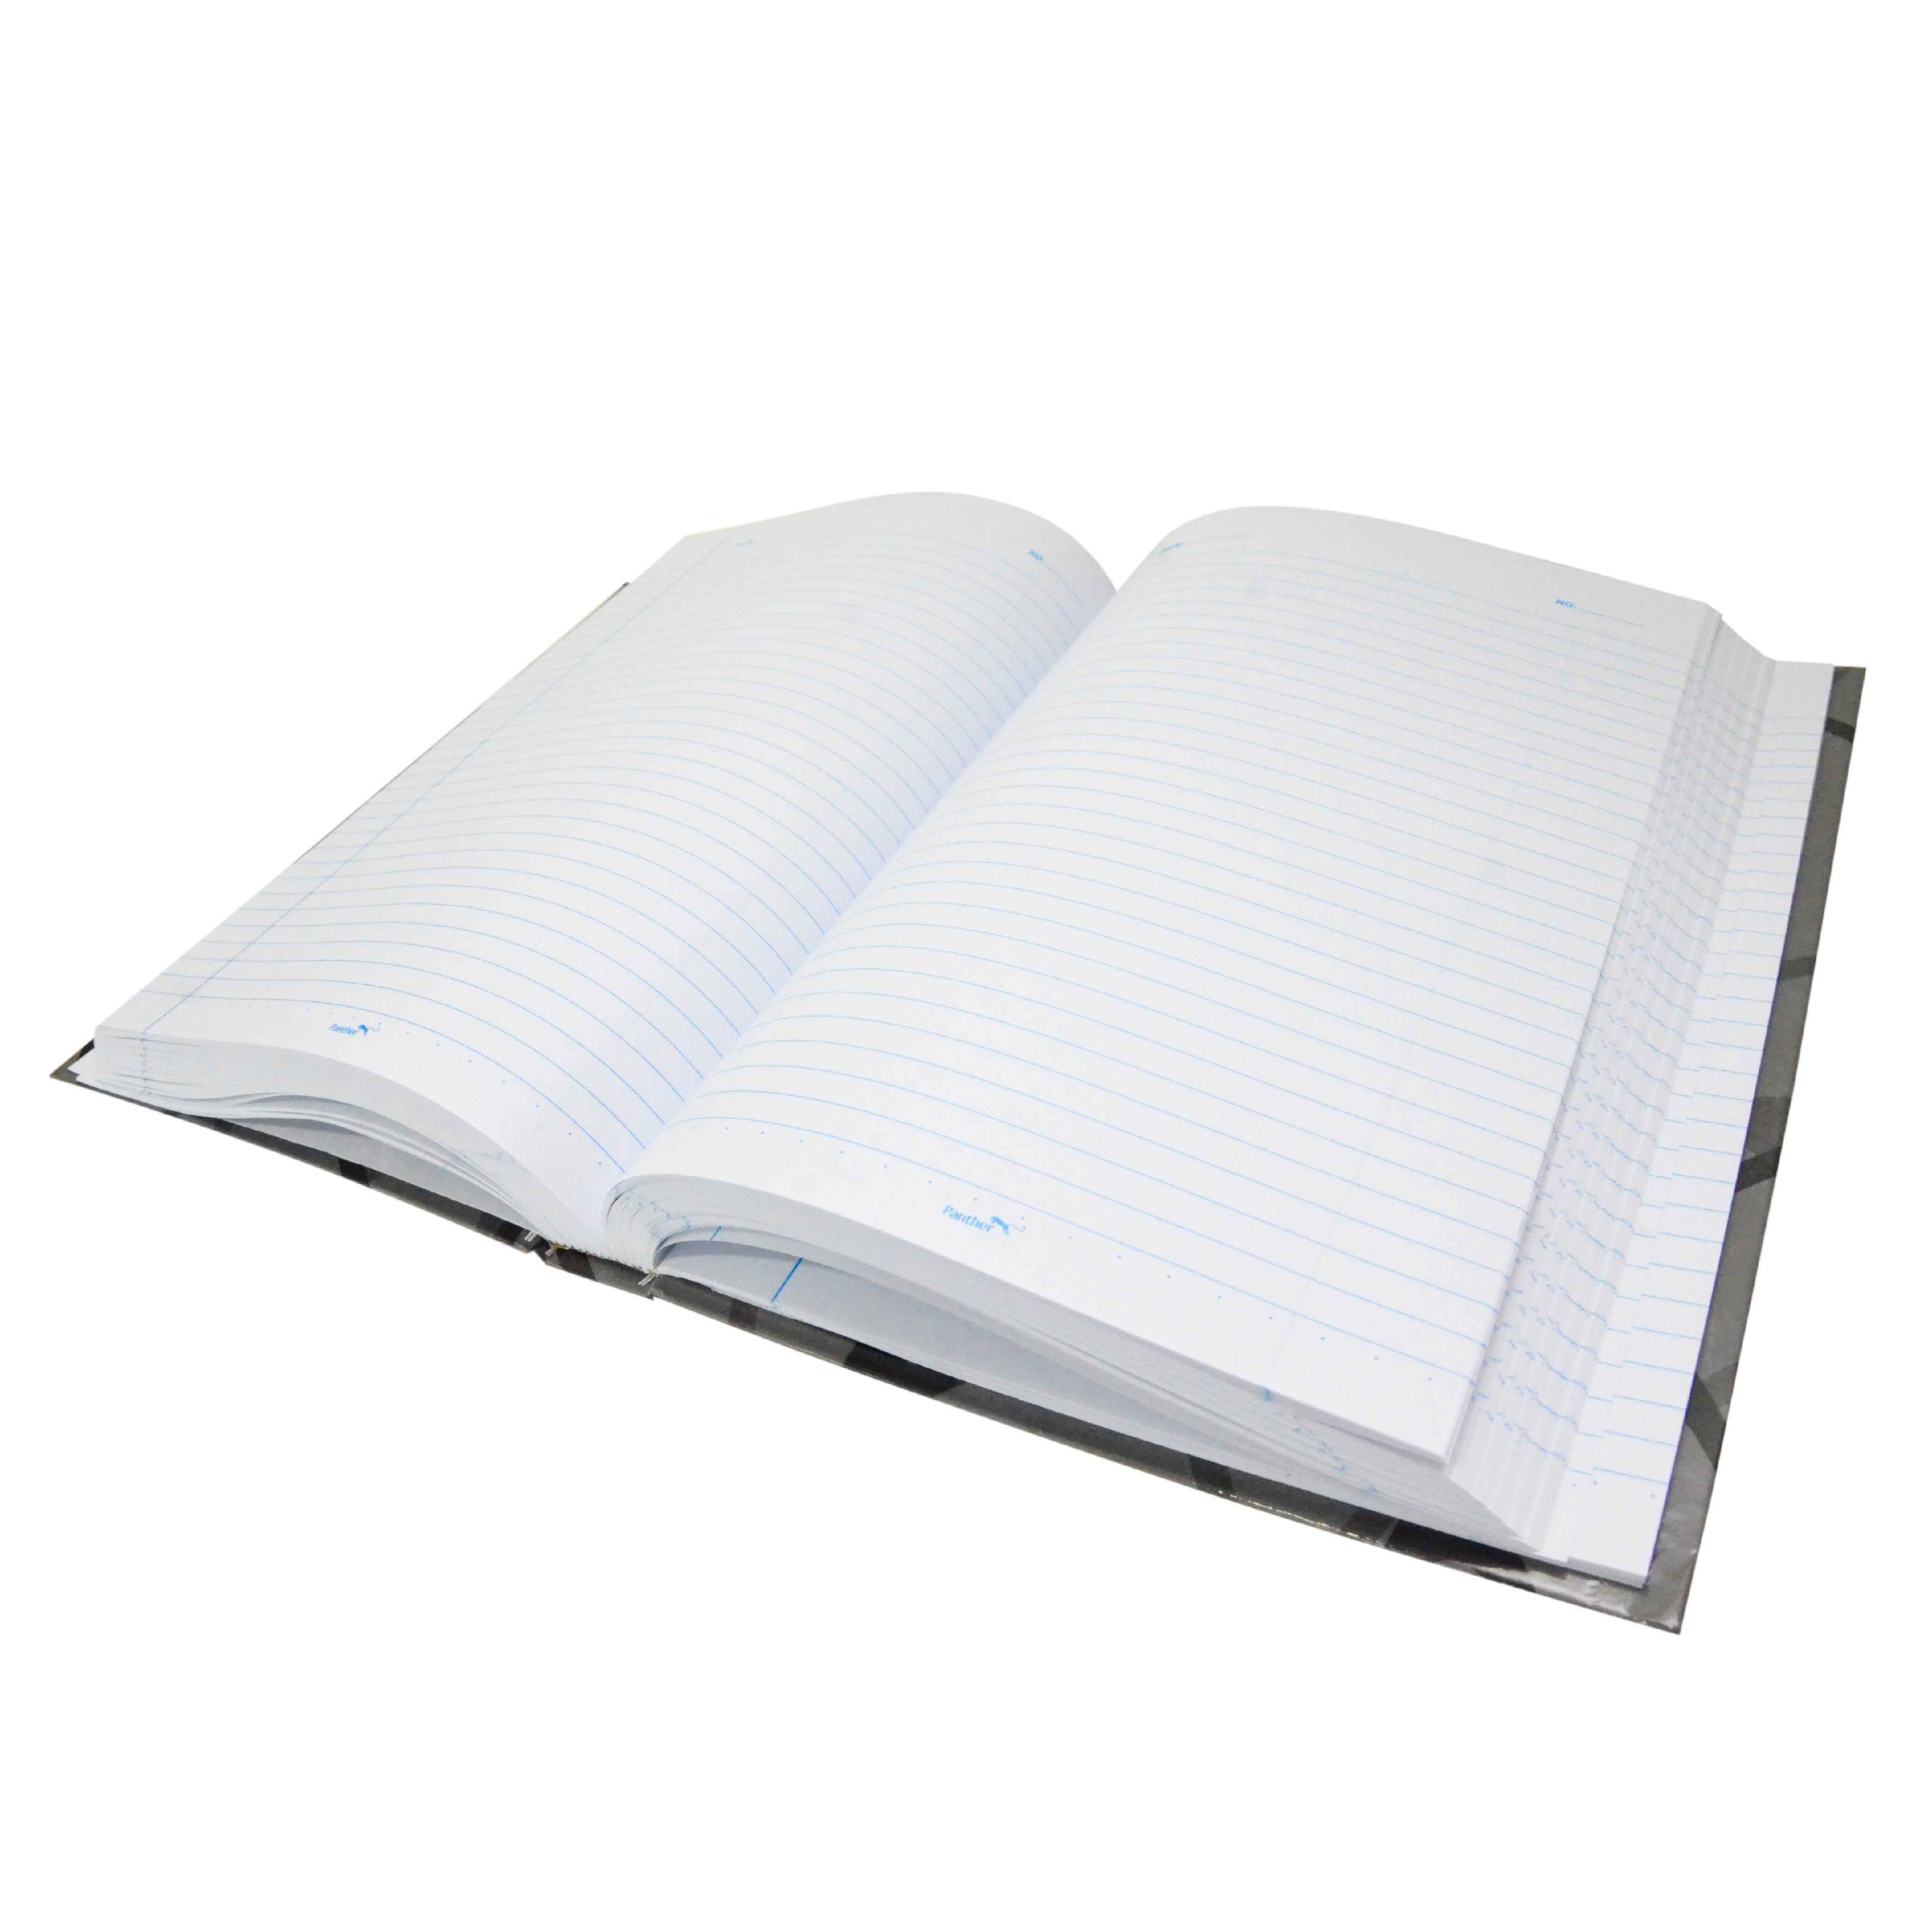 ST2424 A4 Hard Cover Note Book CONNECTED 04 scaled